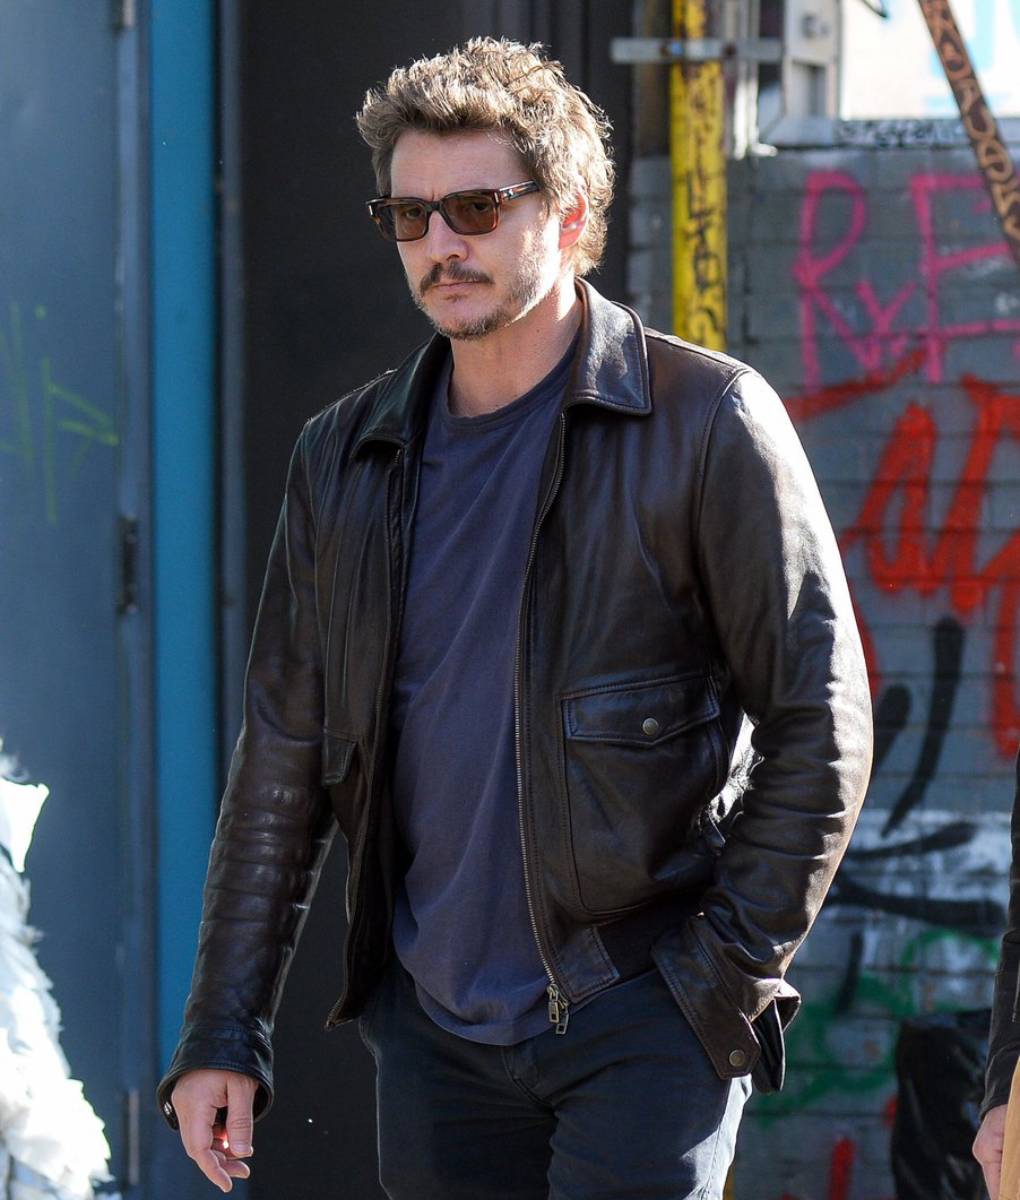 Pedro Pascal Brown Leather Jacket - Pedro Pascal Leather Jacket